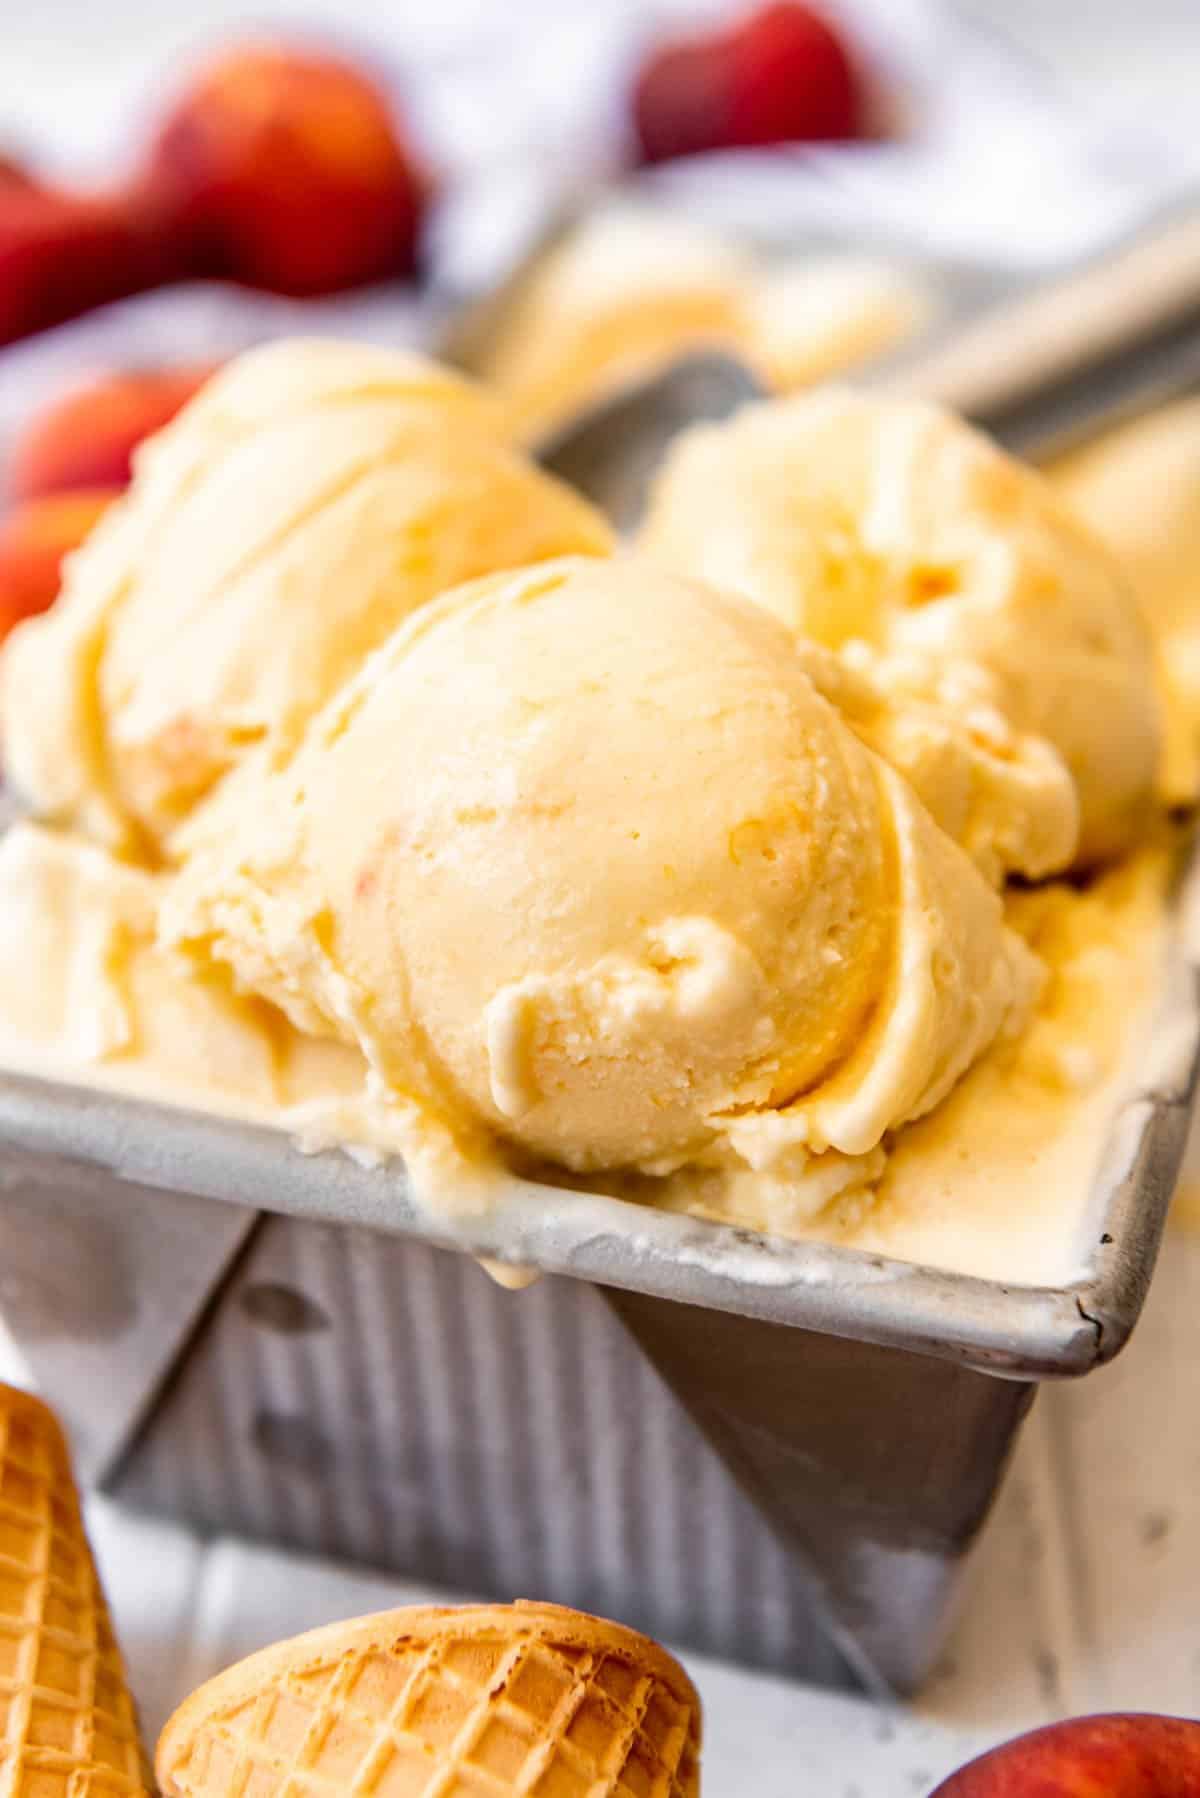 Scoops of homemade peach ice cream in a metal bread pan.